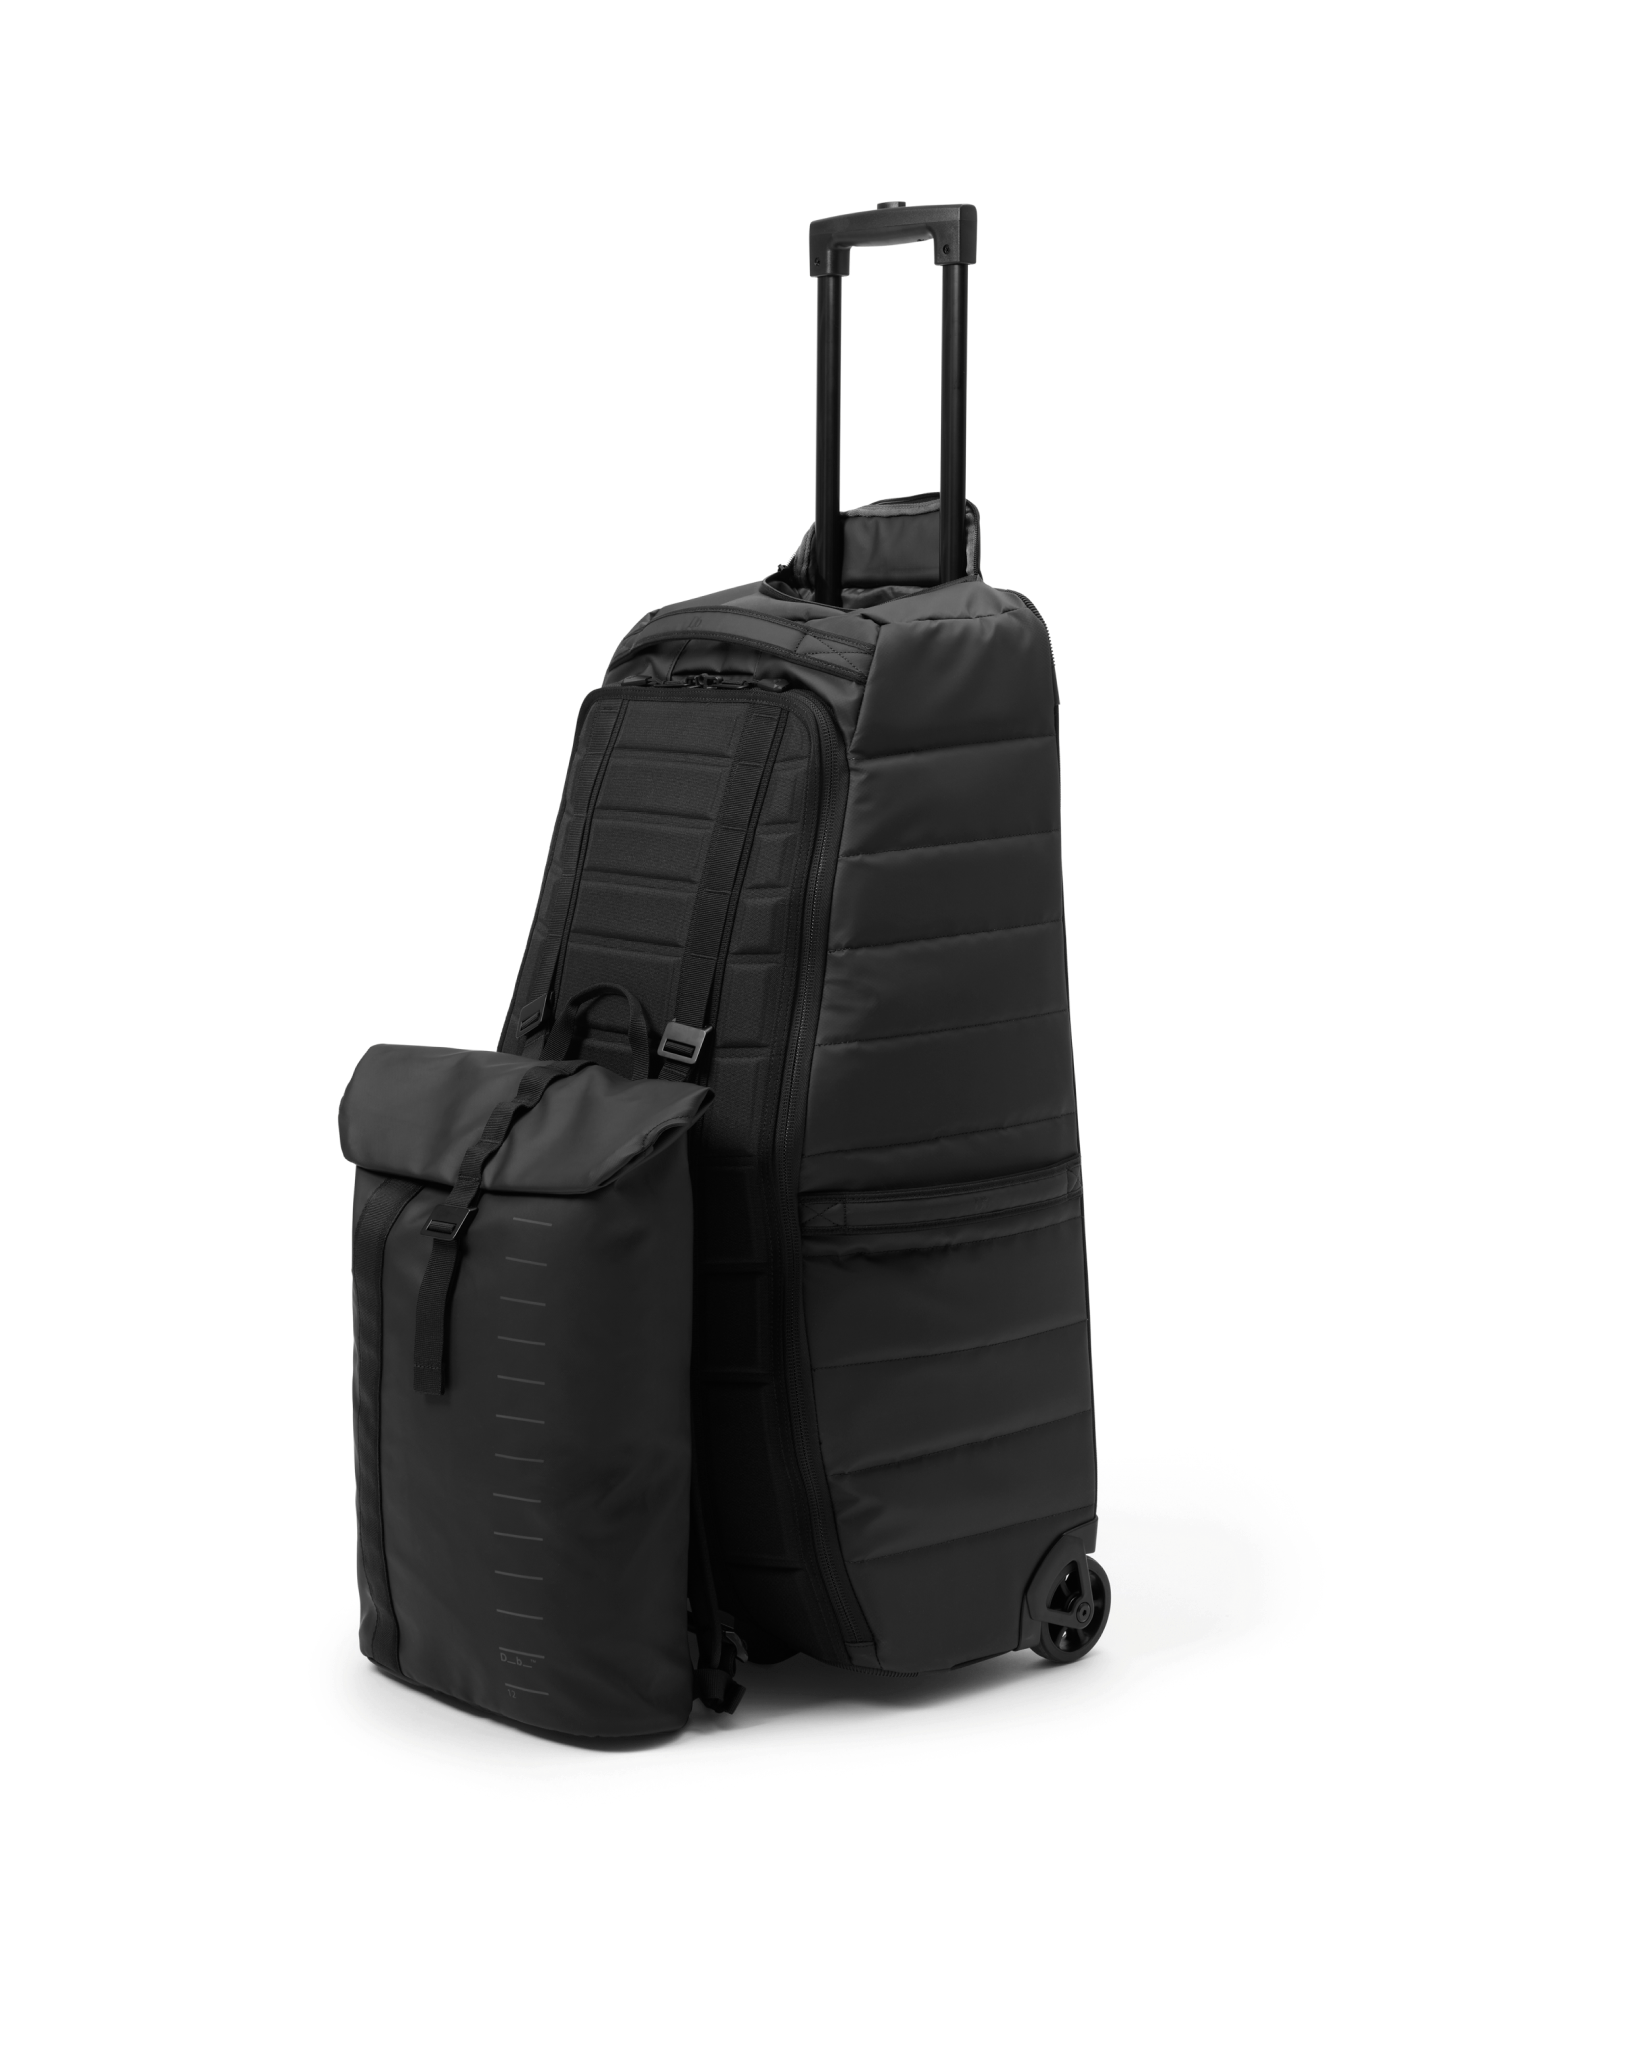 Essential Backpack 12L